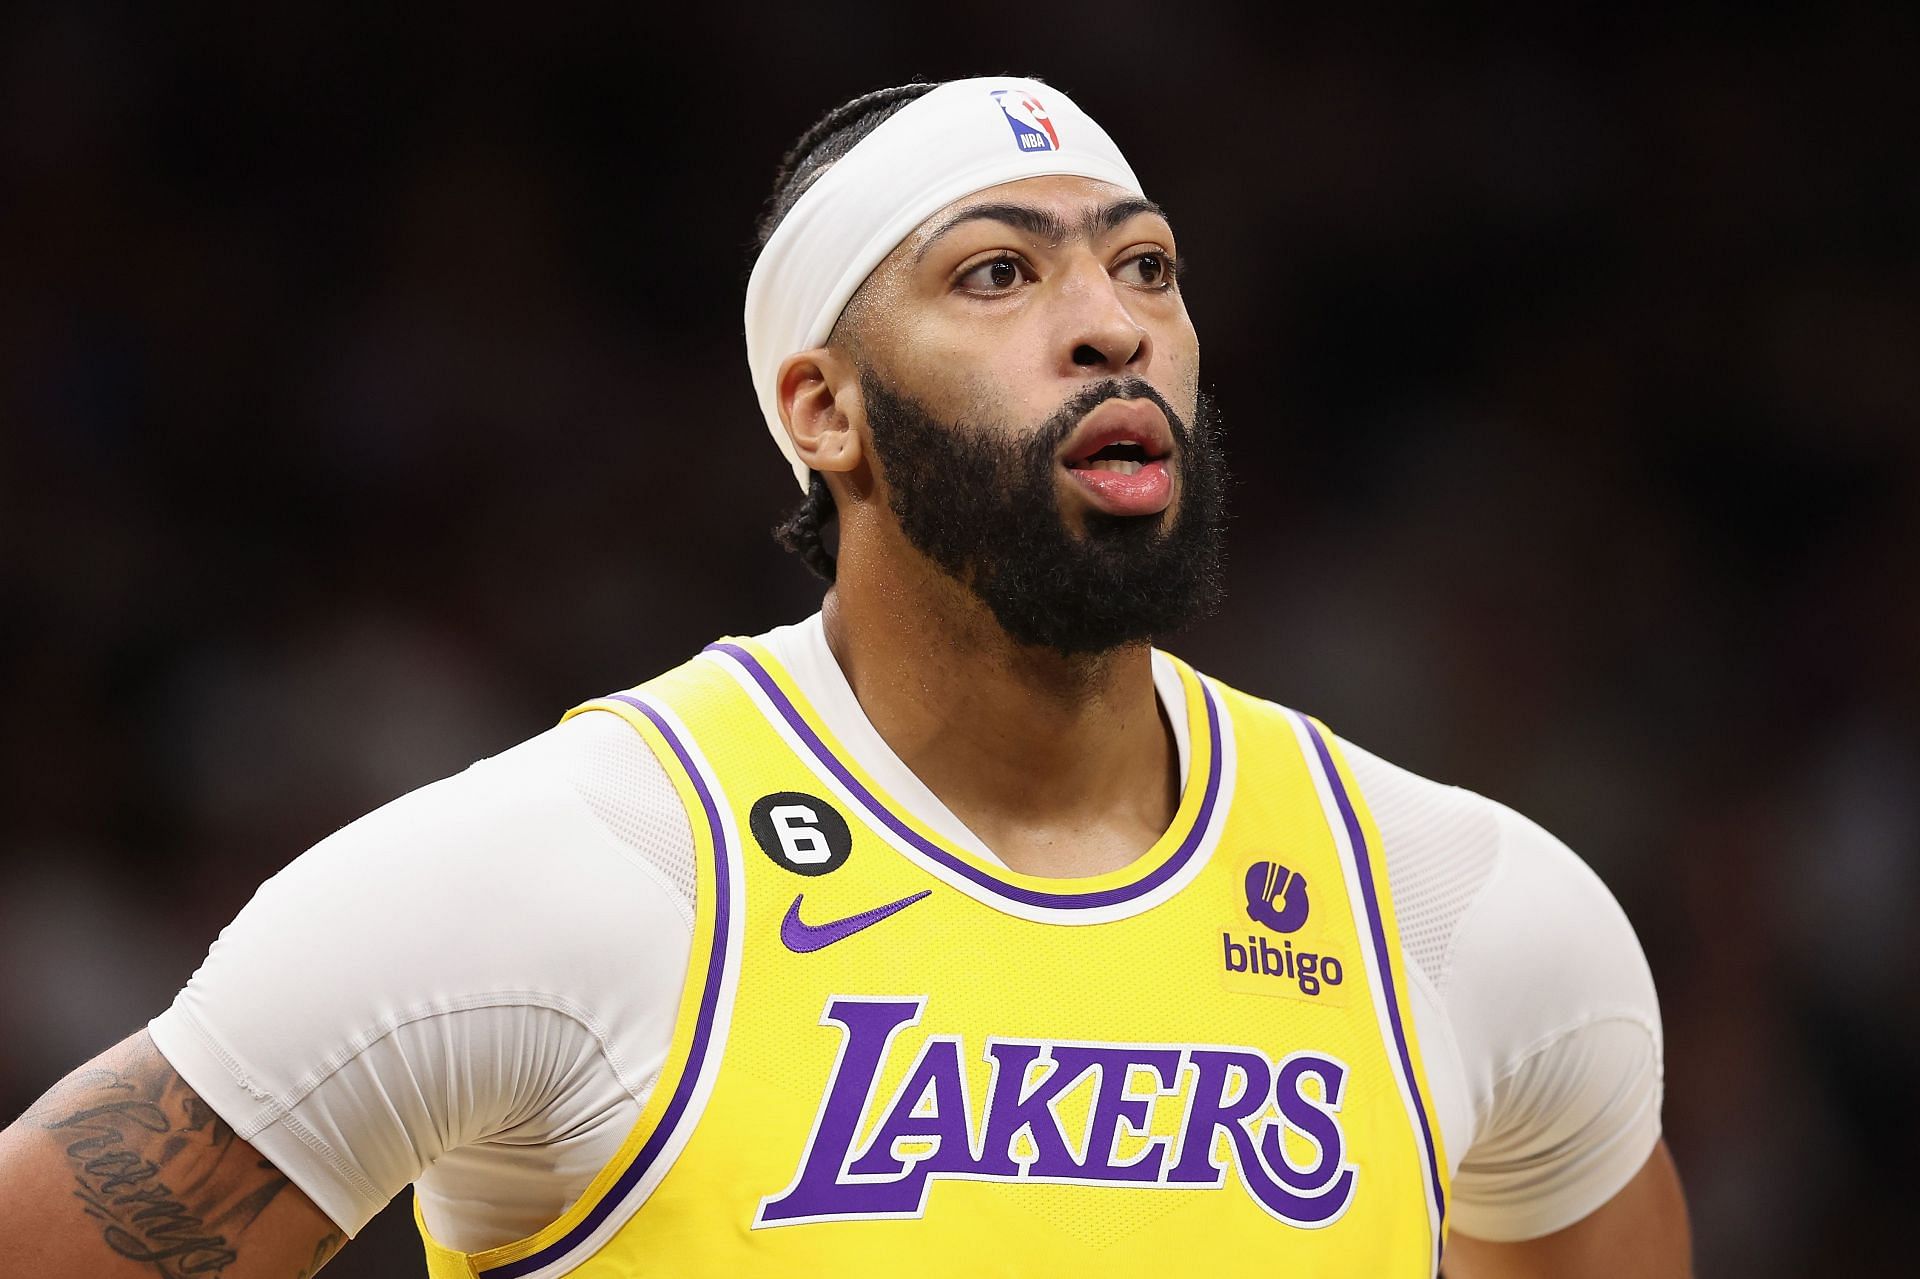 The Time Is Brow: The Lakers Run Through Anthony Davis Now - The